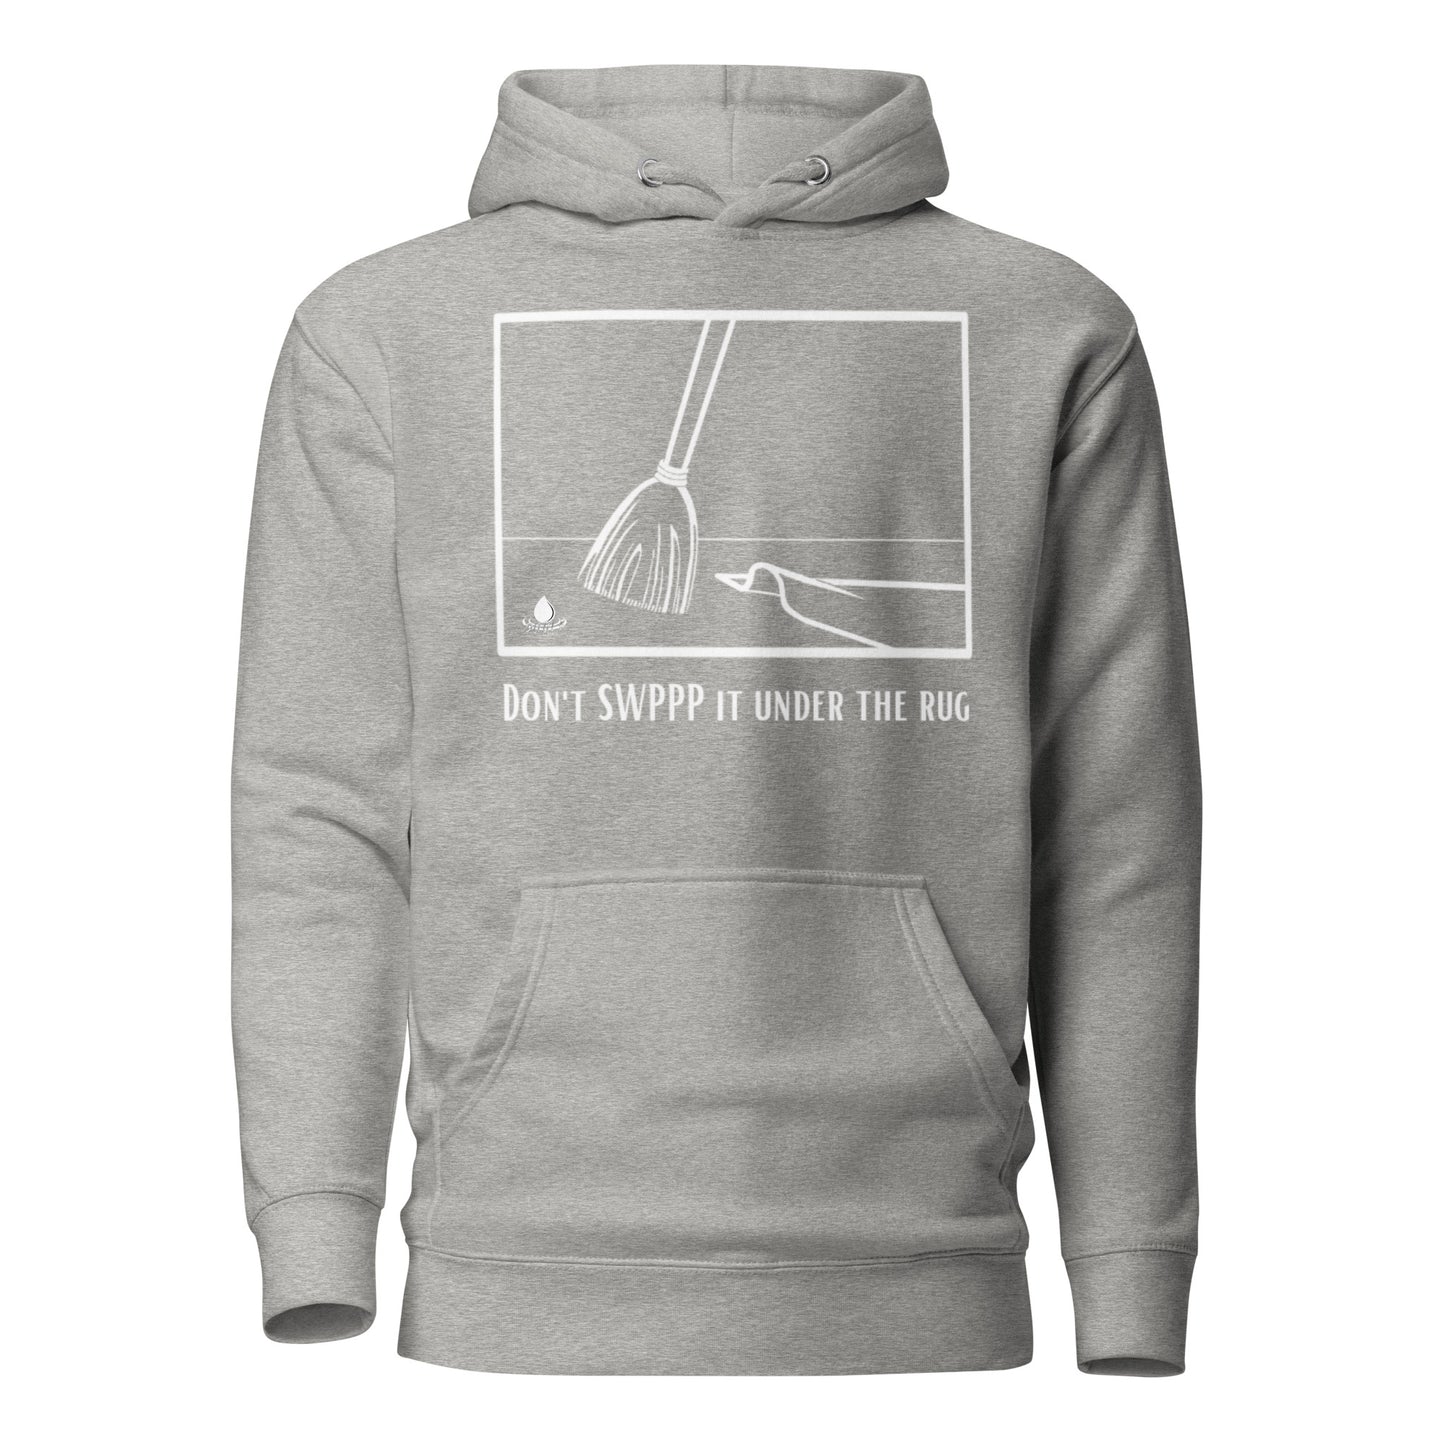 Don't SWPPP it under the rug - Unisex Hoodie